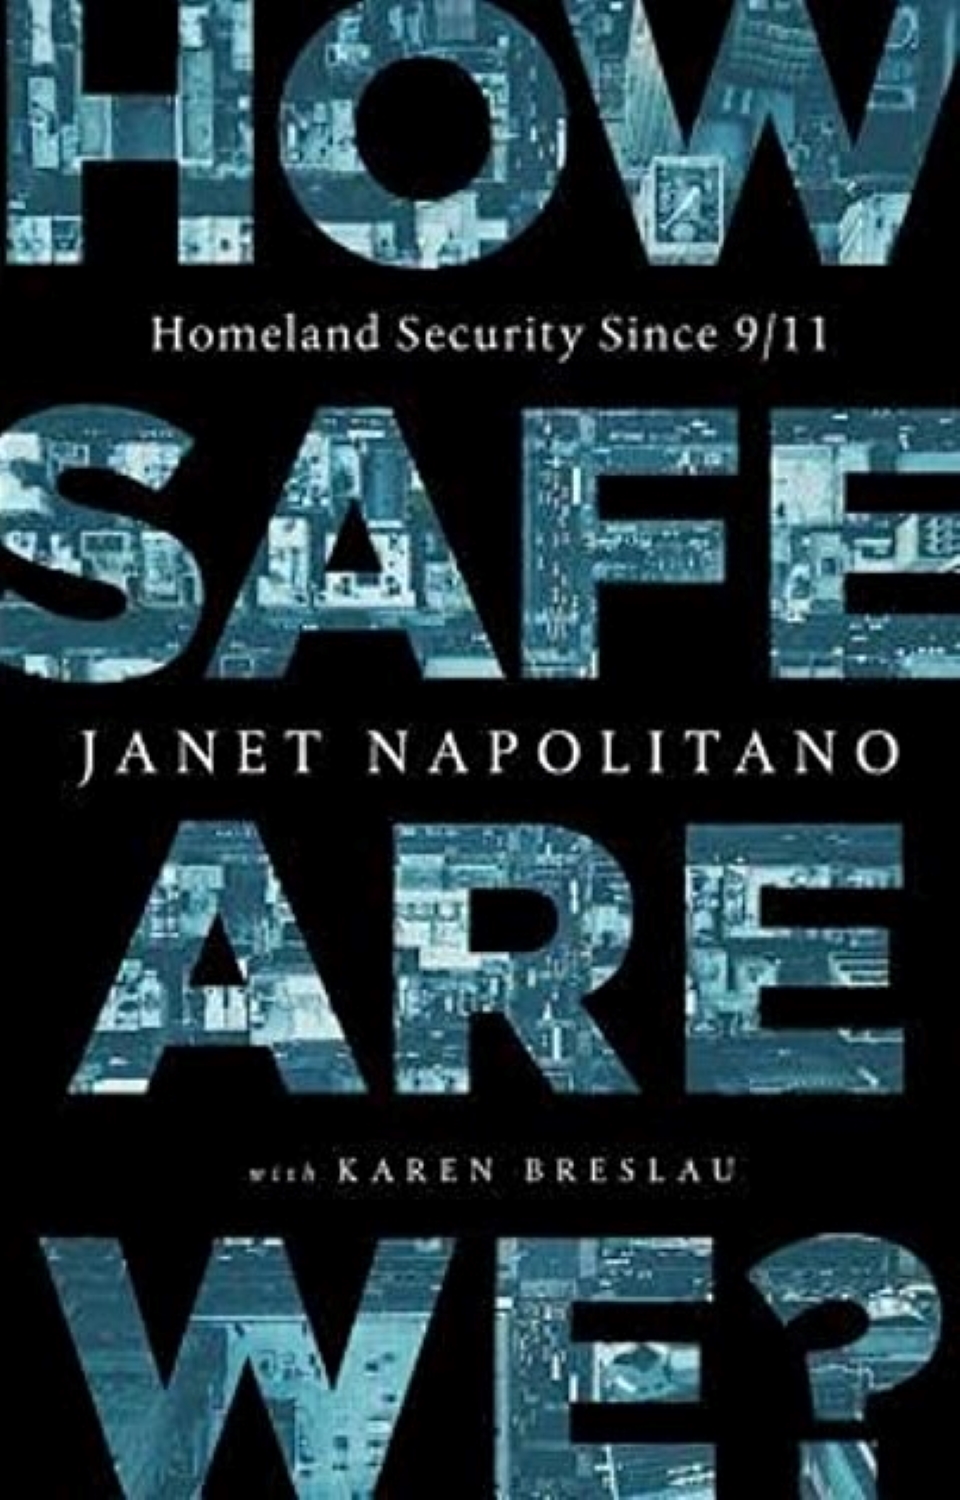 ow Safe Are We by Janet Napolitano